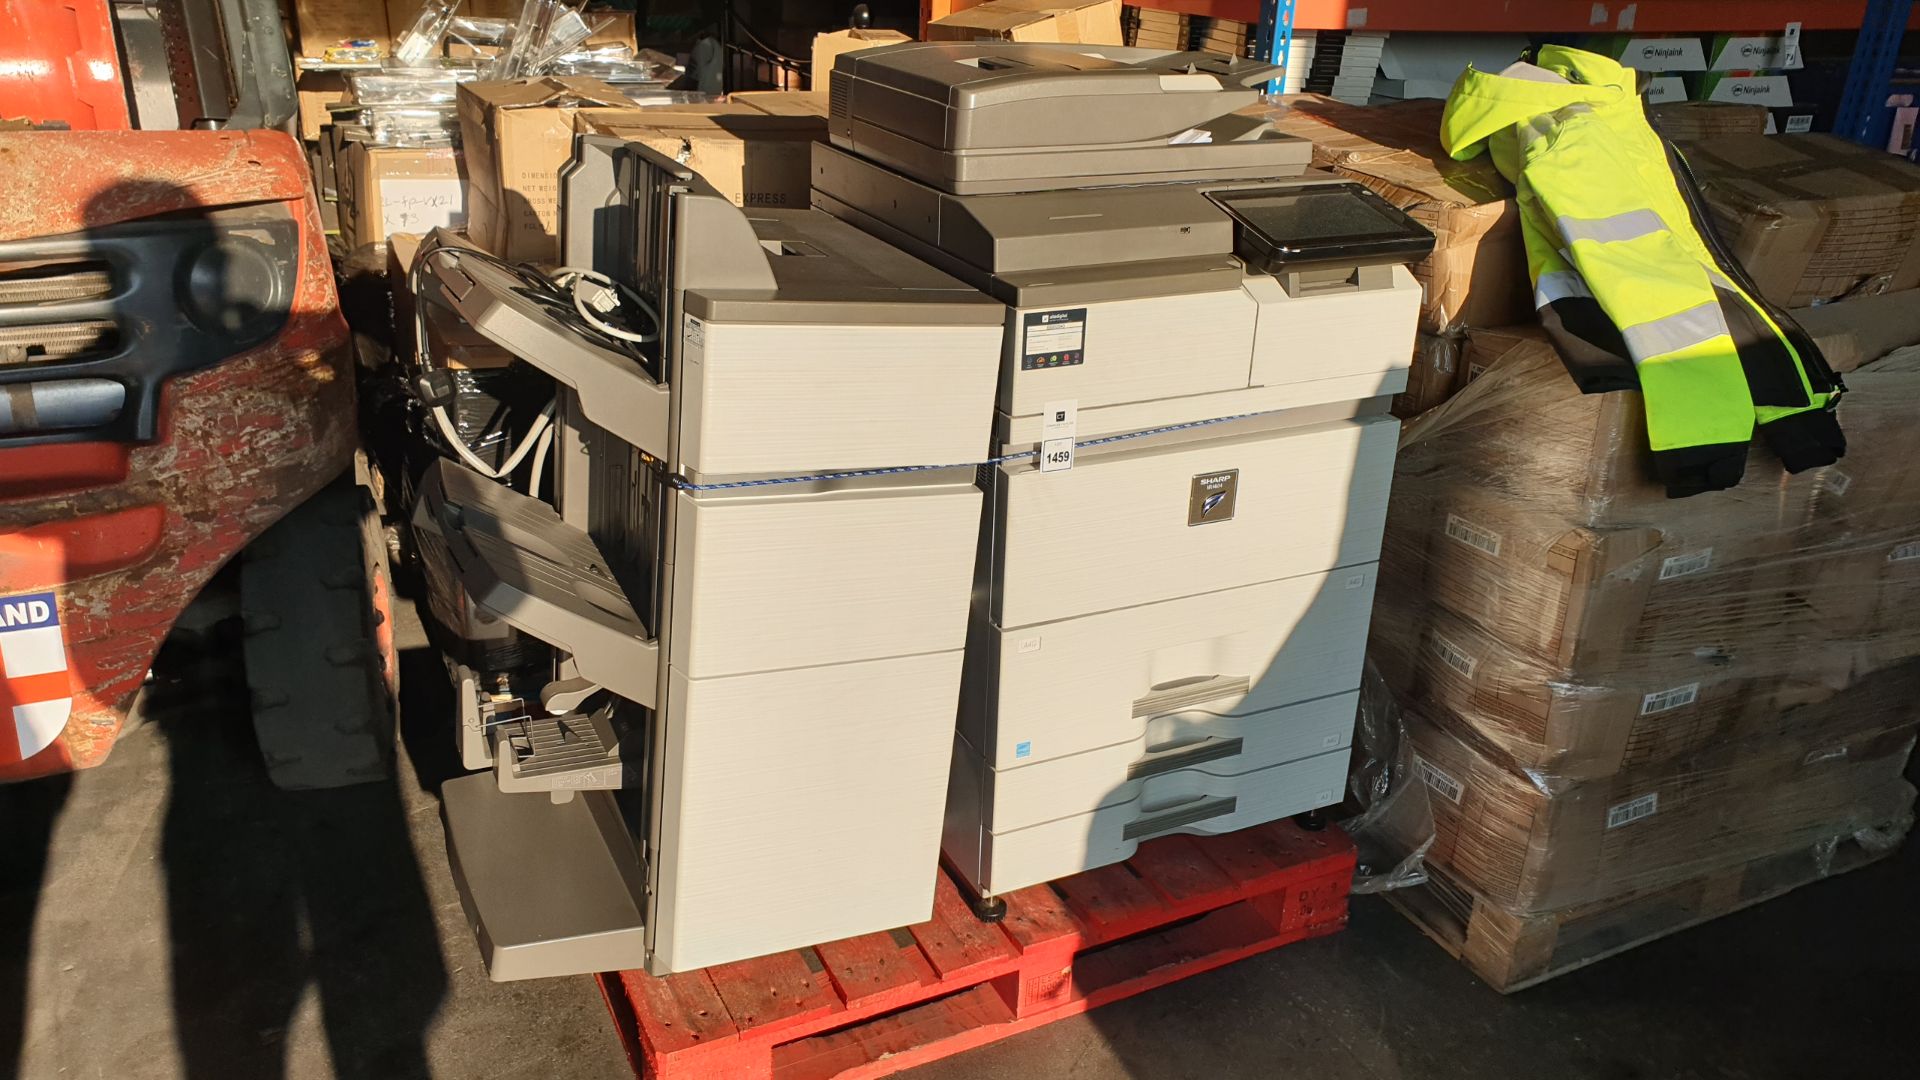 SHARP MX-M654 PHOTOCOPIER WITH SIDE FEEDER TRAY FOR MASS PRINTING